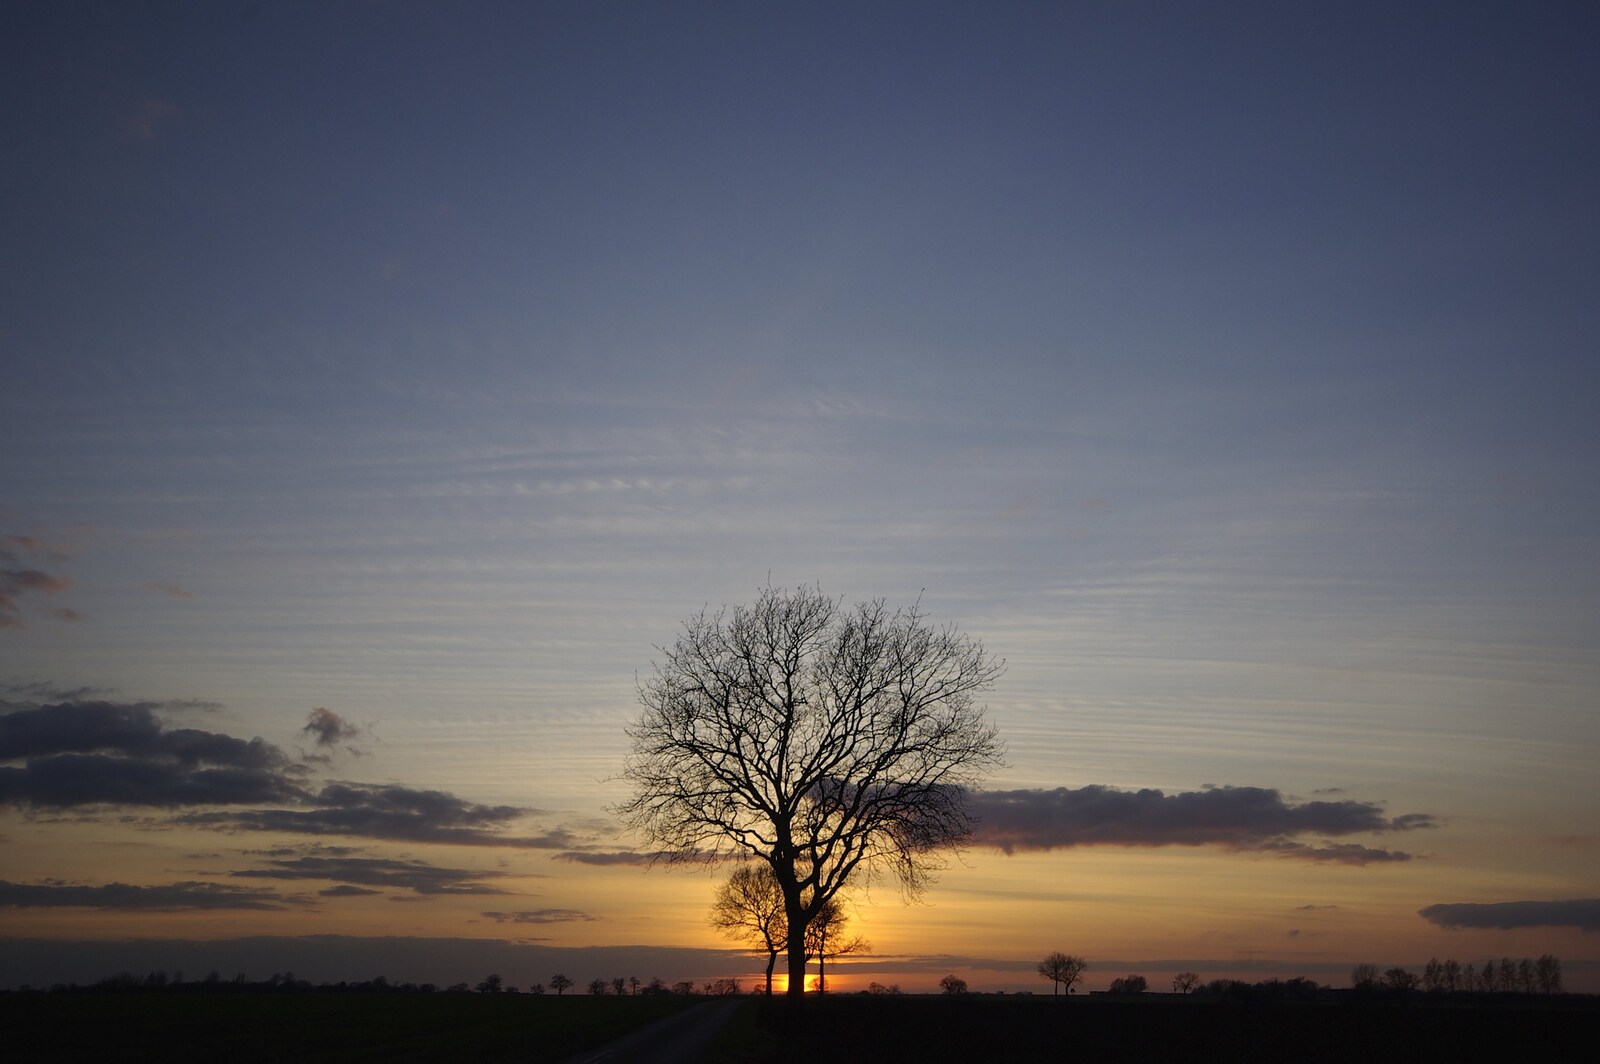 A lonely tree near Walsham le Willows from A Night in the Salisbury Arms, Cambridge - 9th March 2007